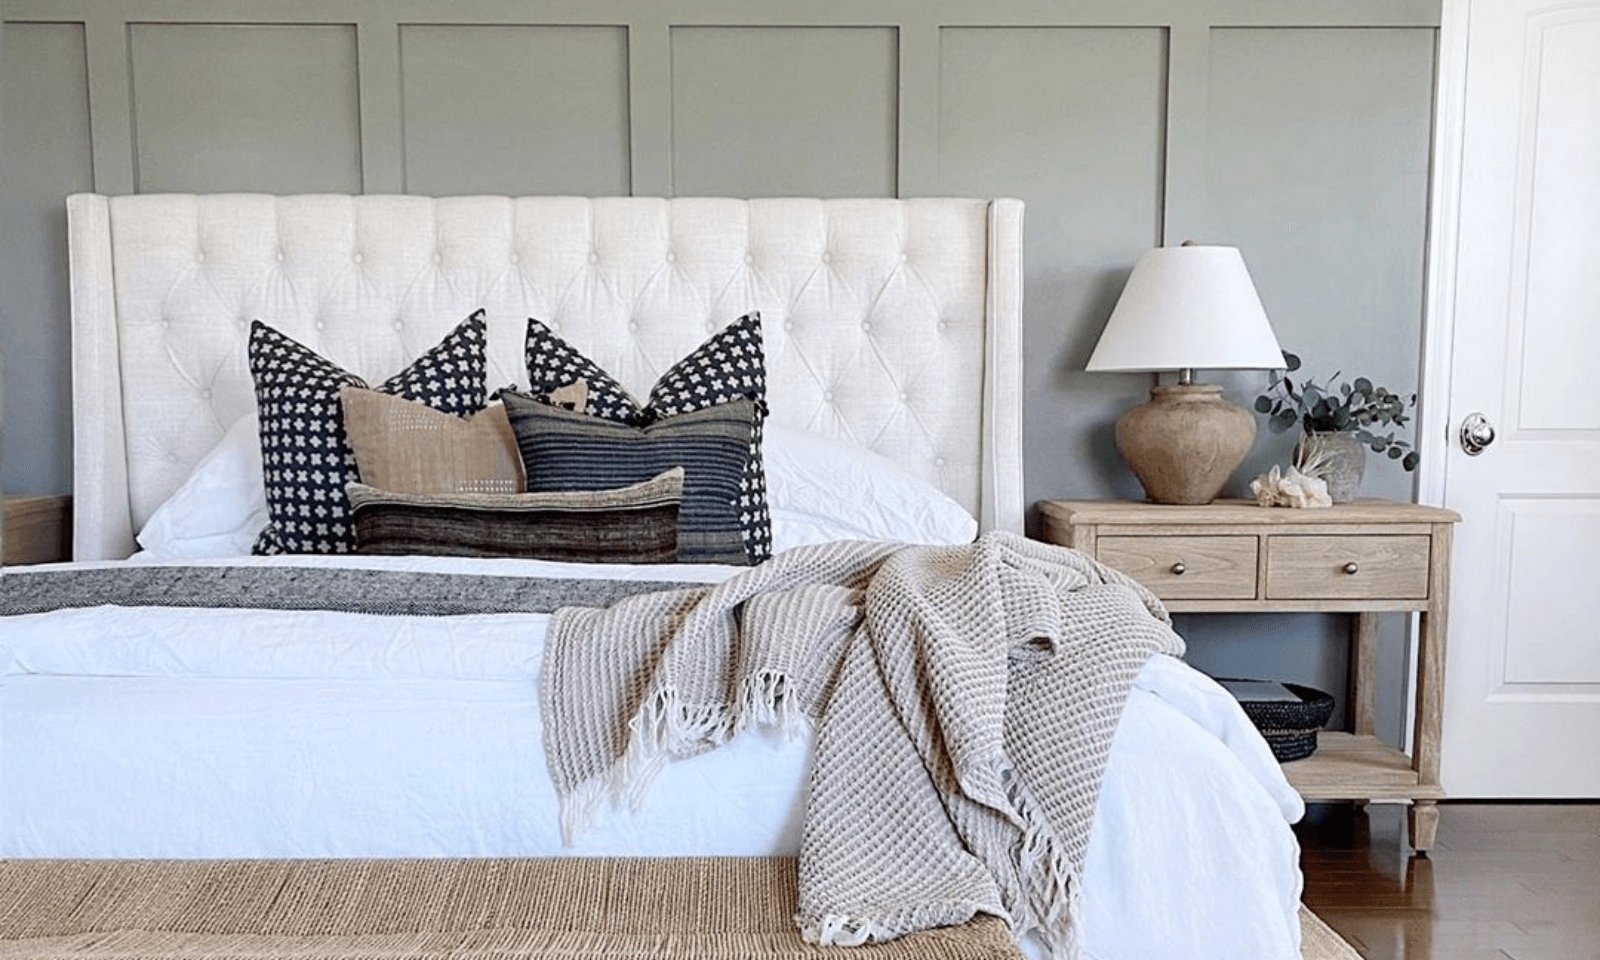 HOW TO TRANSFORM YOUR MASTER BEDROOM SUITE